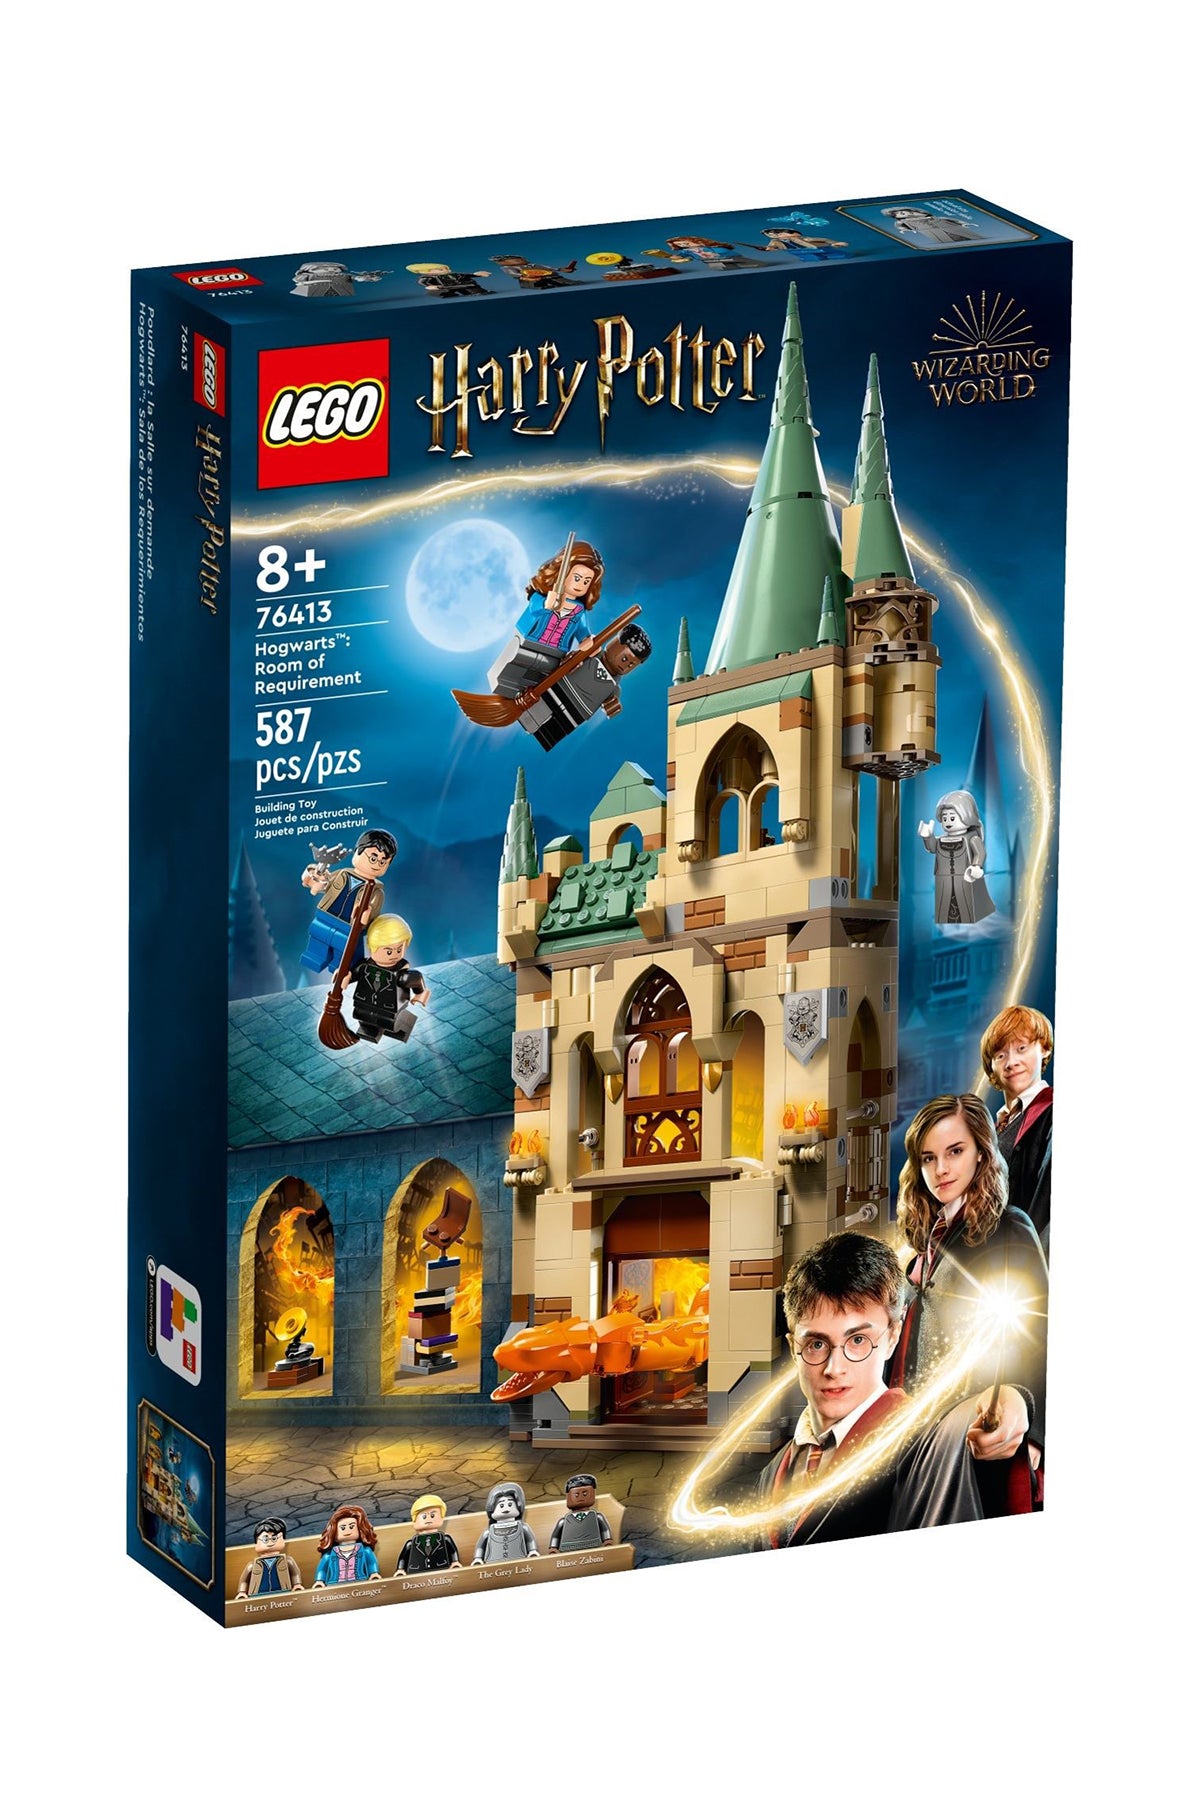 Lego Harry Potter Hogwarts: Room of Requirement